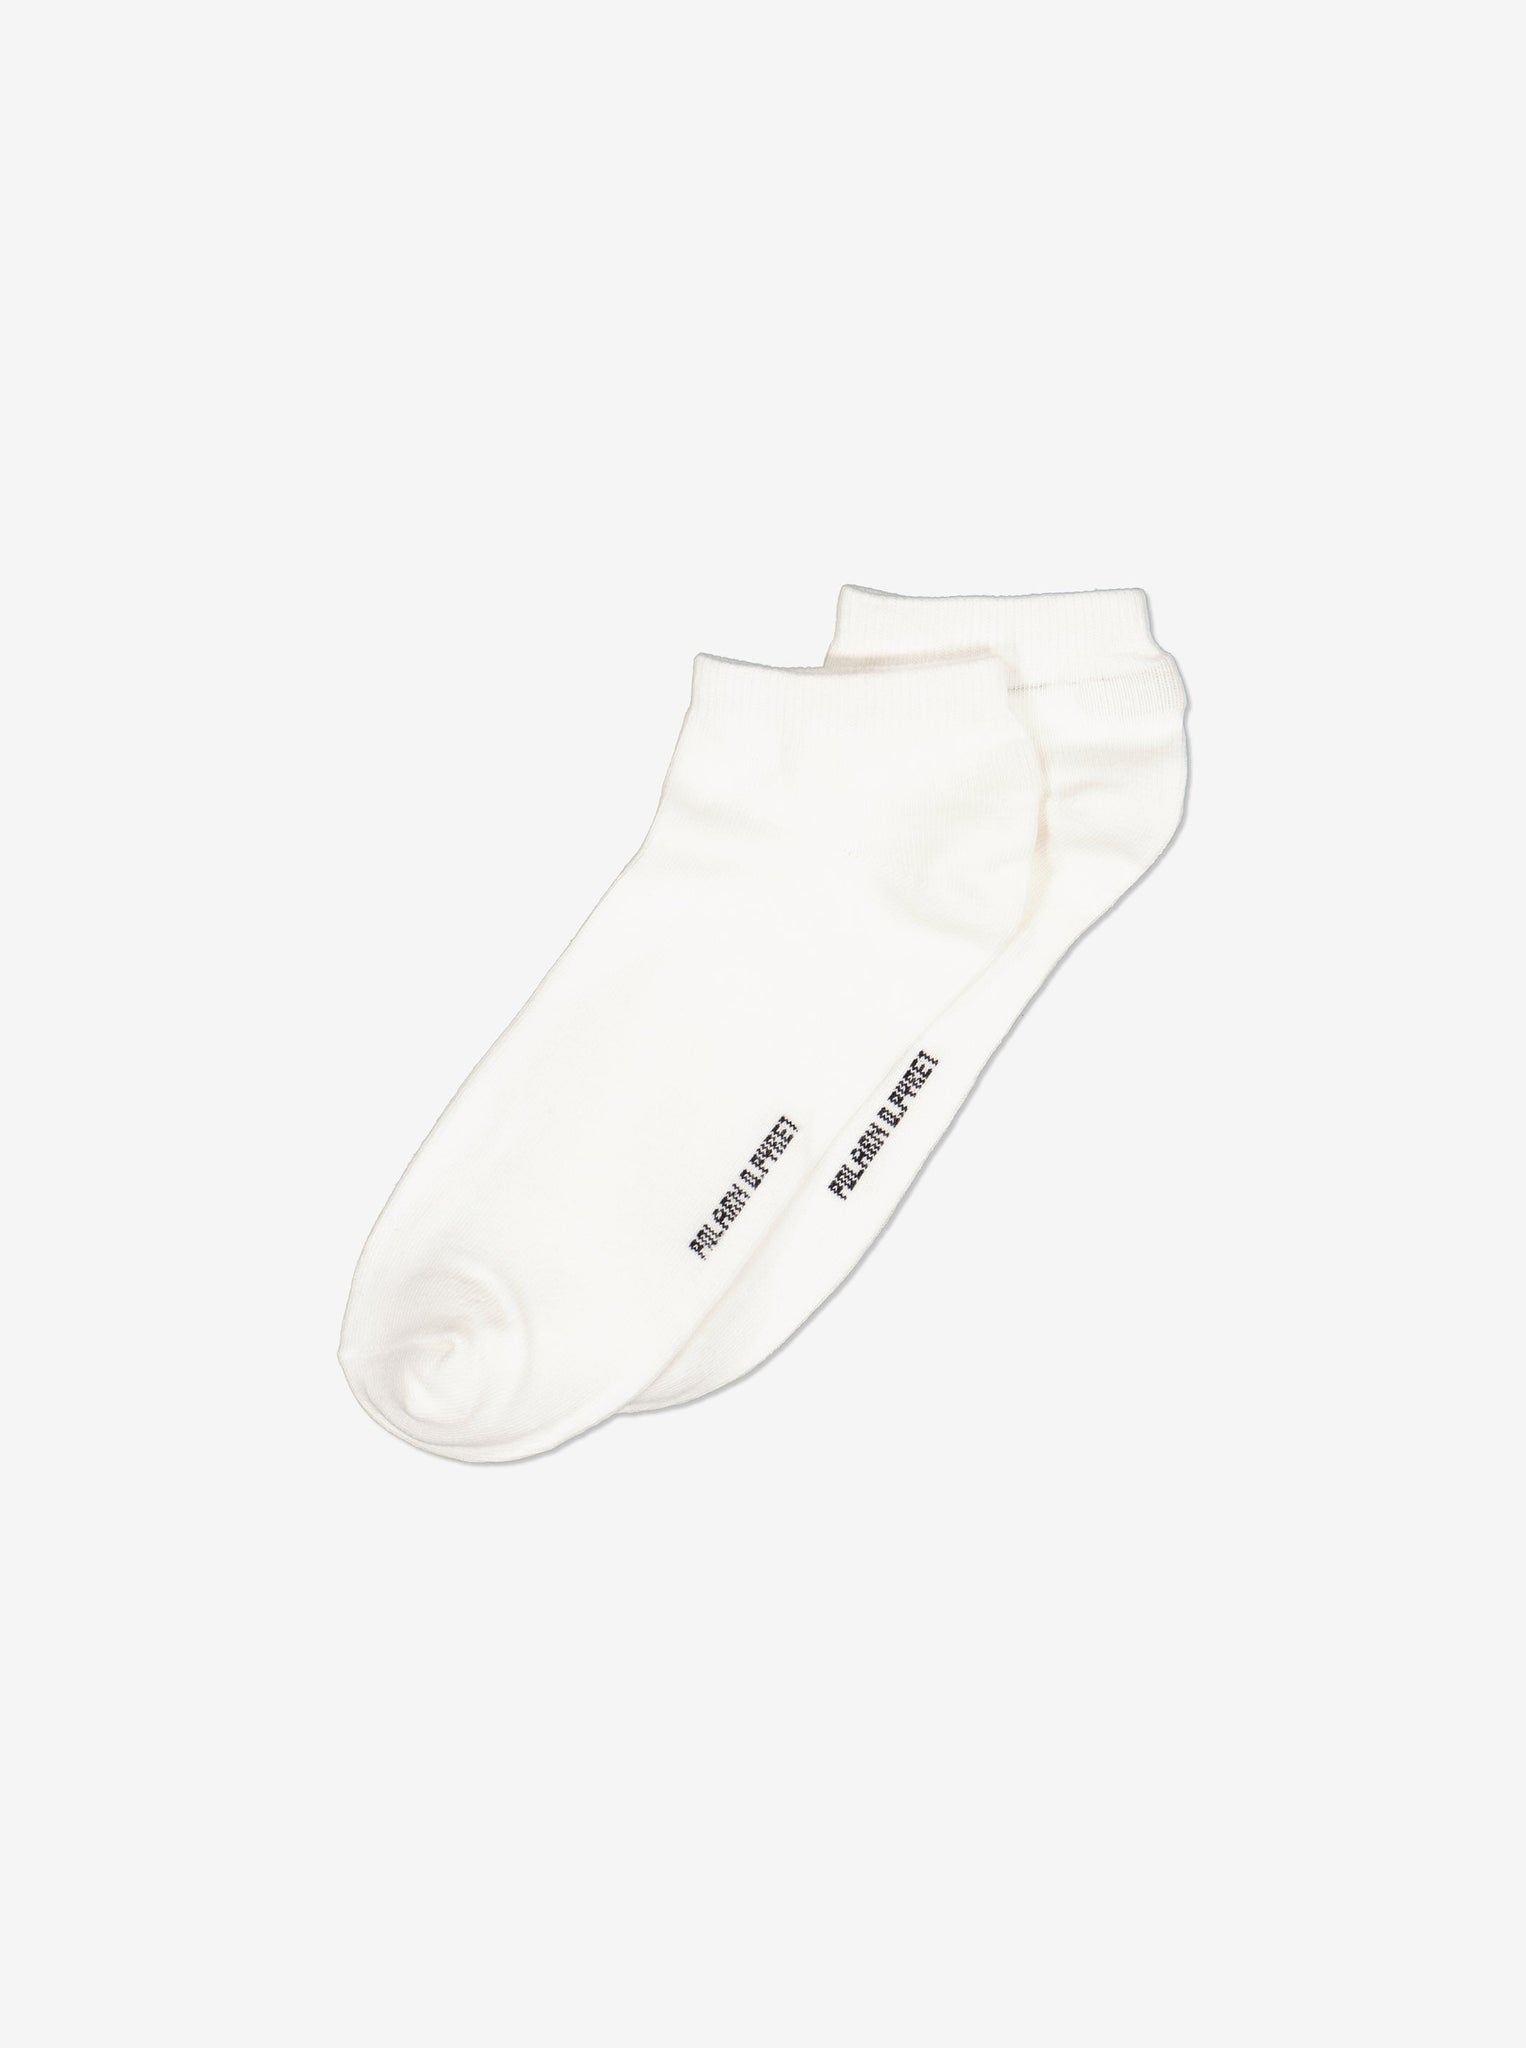  Kids White Trainer Socks from Polarn O. Pyret Kidswear. Made using ethically sourced materials.